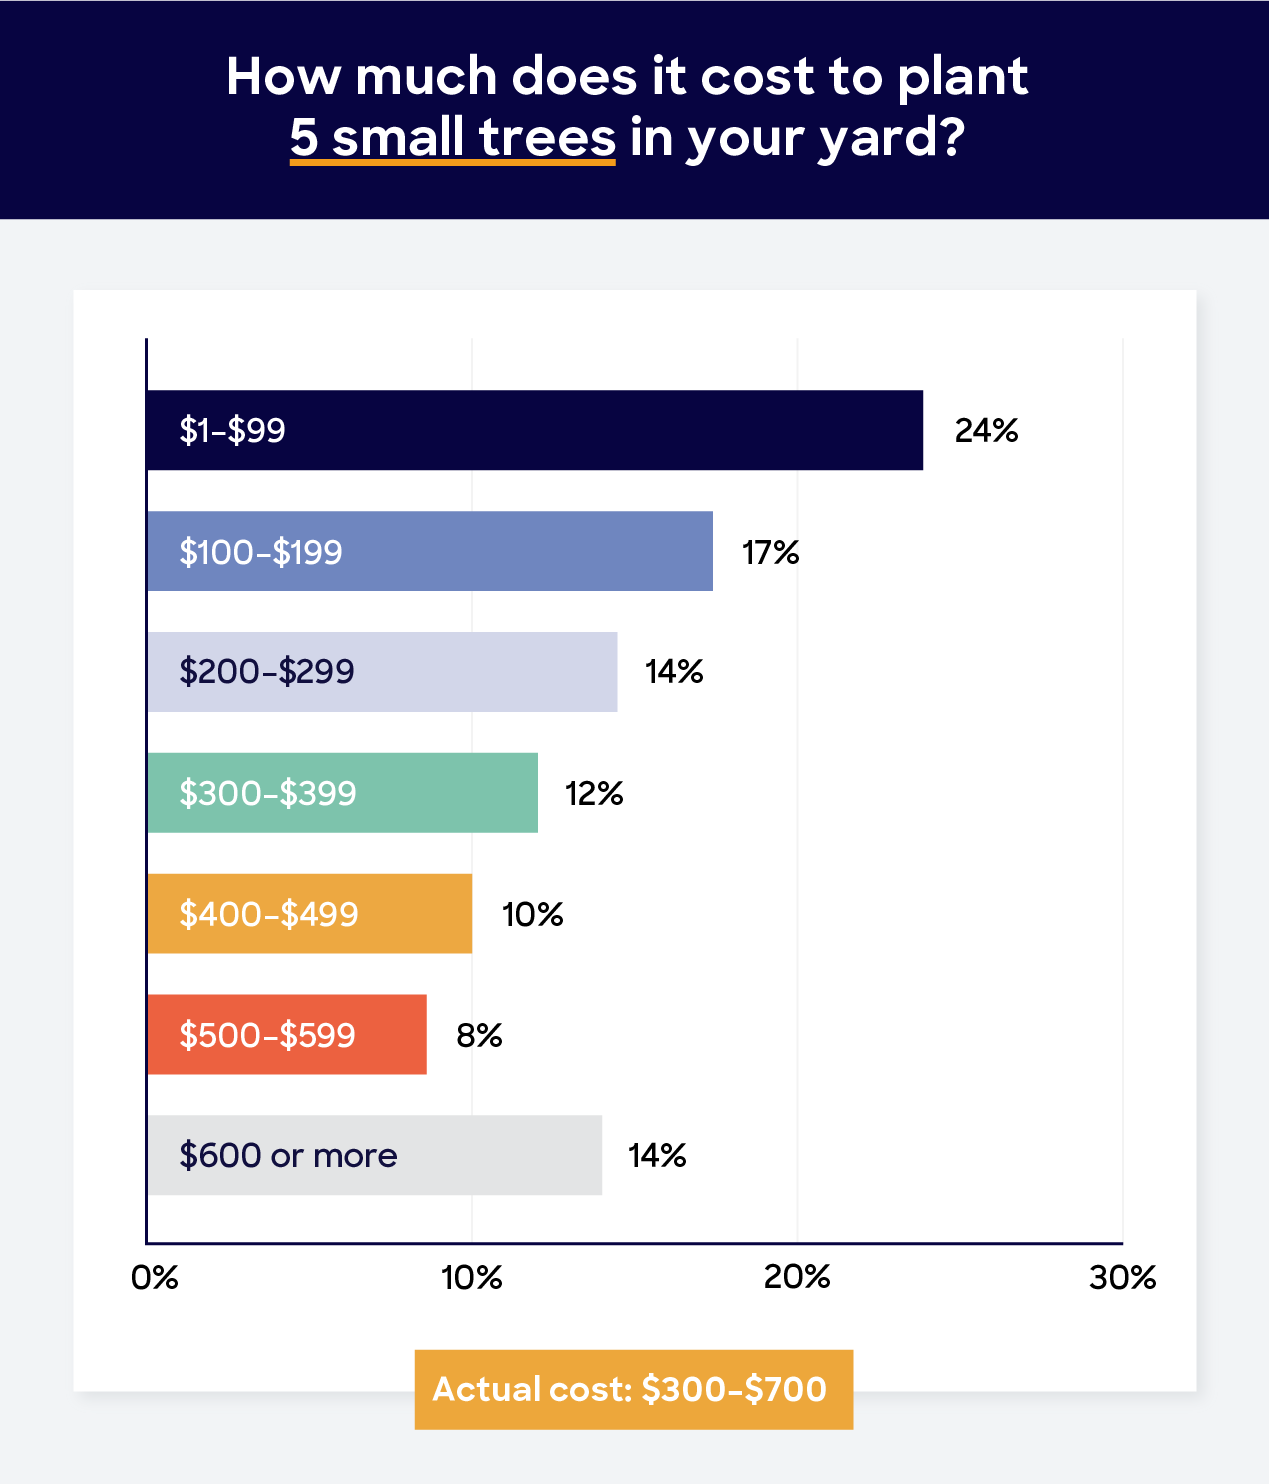 It costs around $300-$700 to plant five small trees in your yard. 